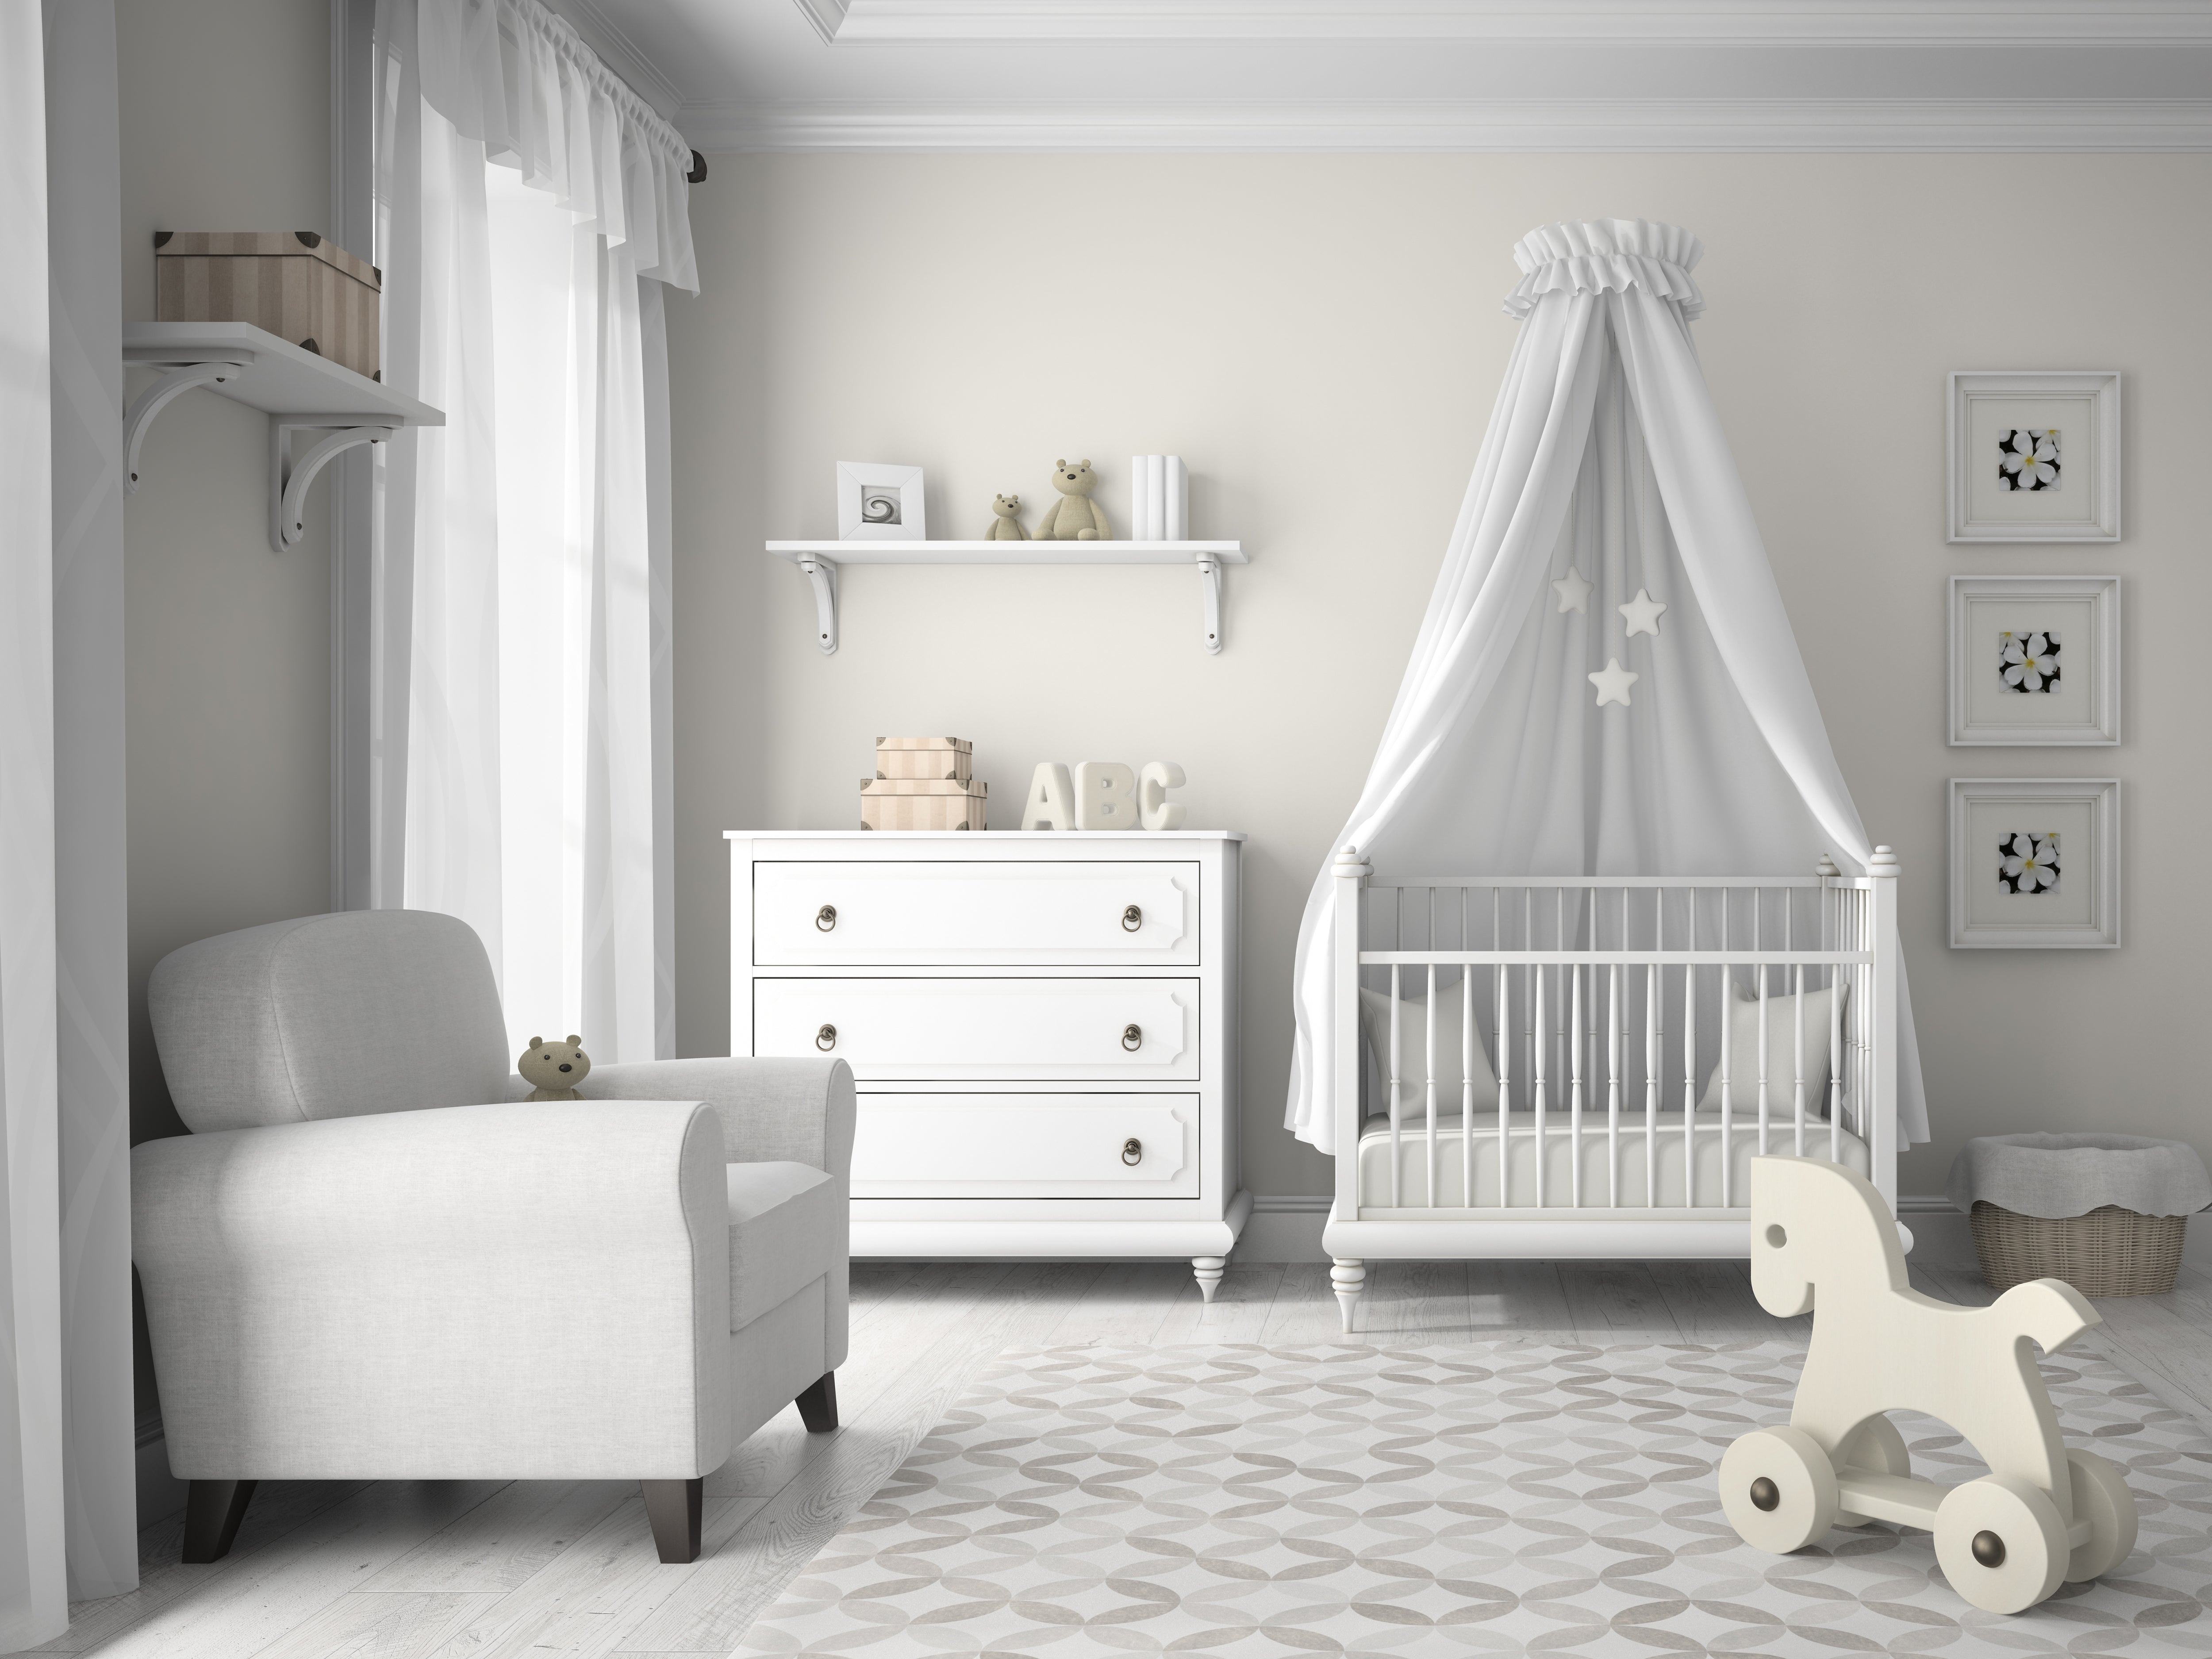 A Valuable Insight for your Newborn's Nursery Room